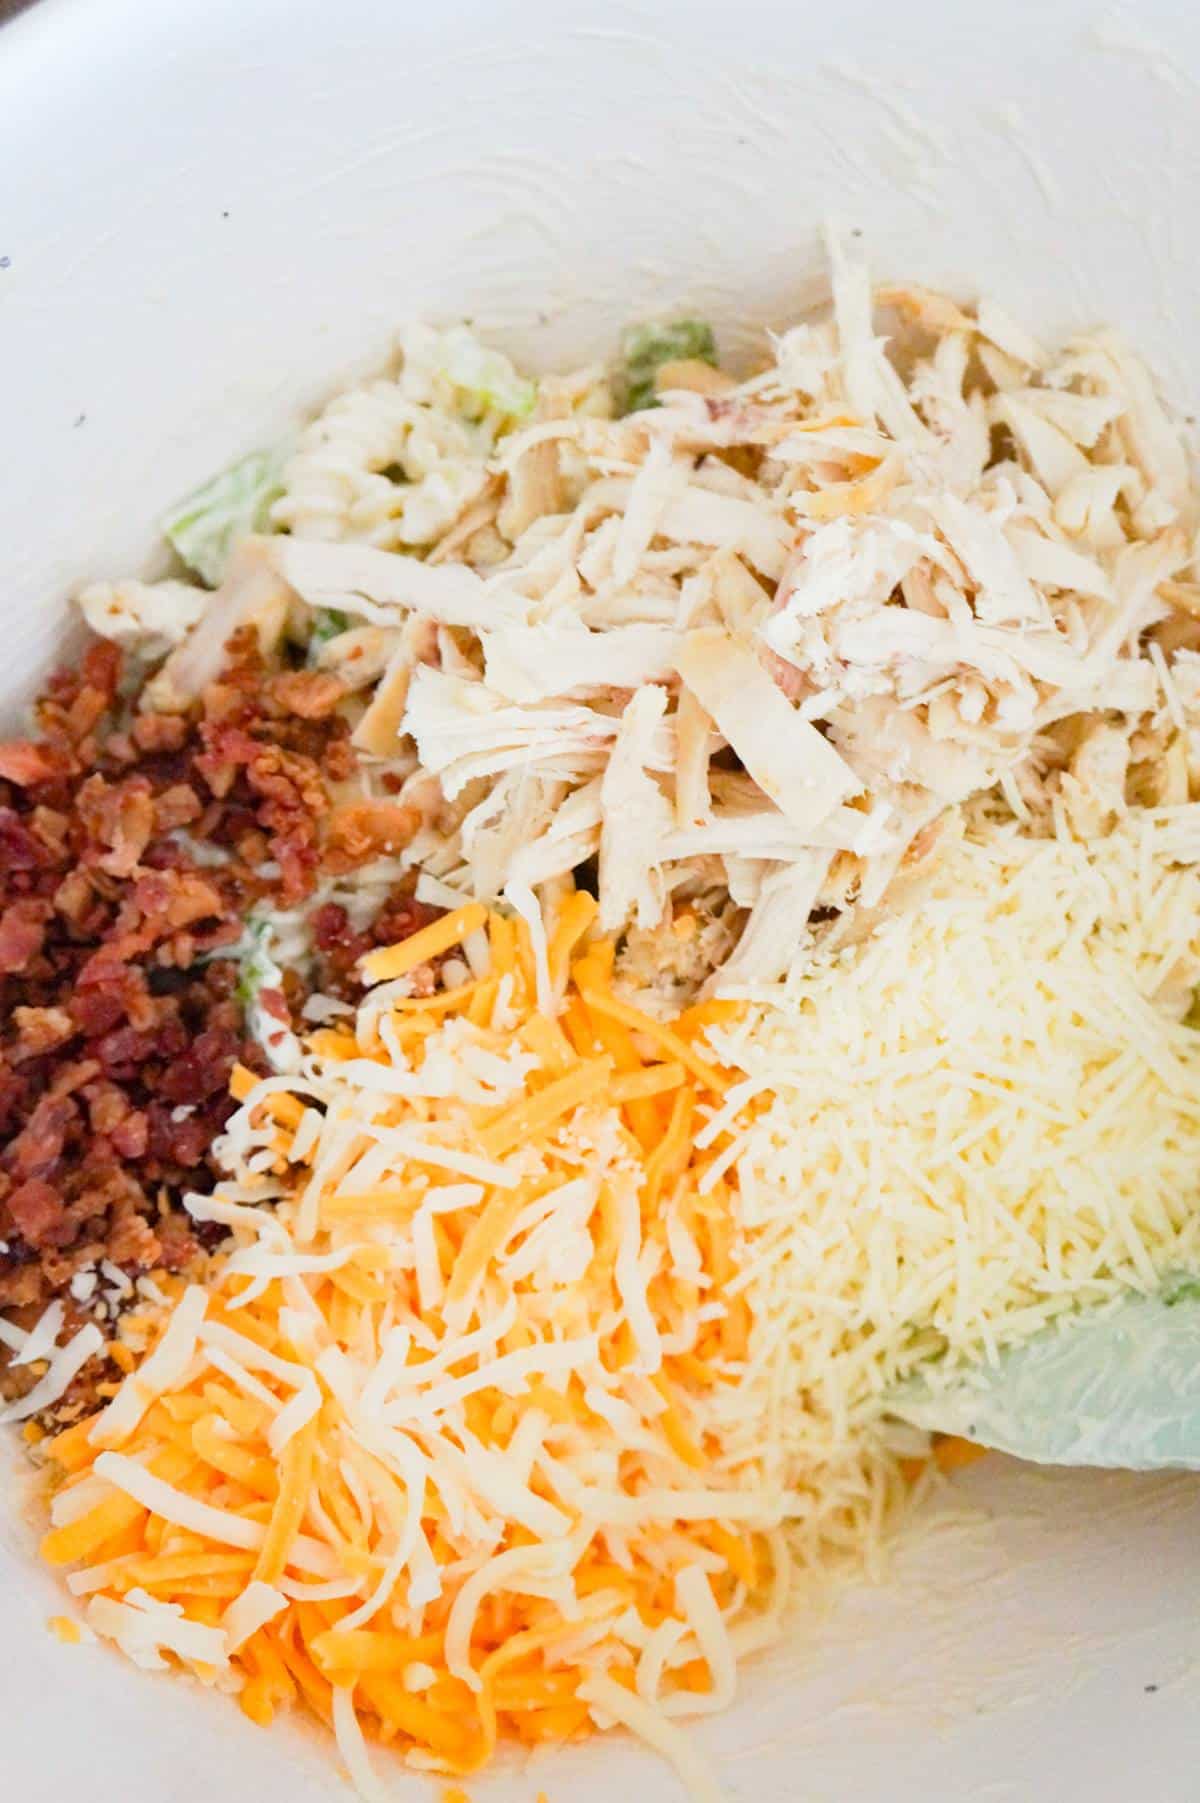 shredded chicken, crumbled bacon, shredded mozzarella, cheddar and Parmesan in a mixing bowl